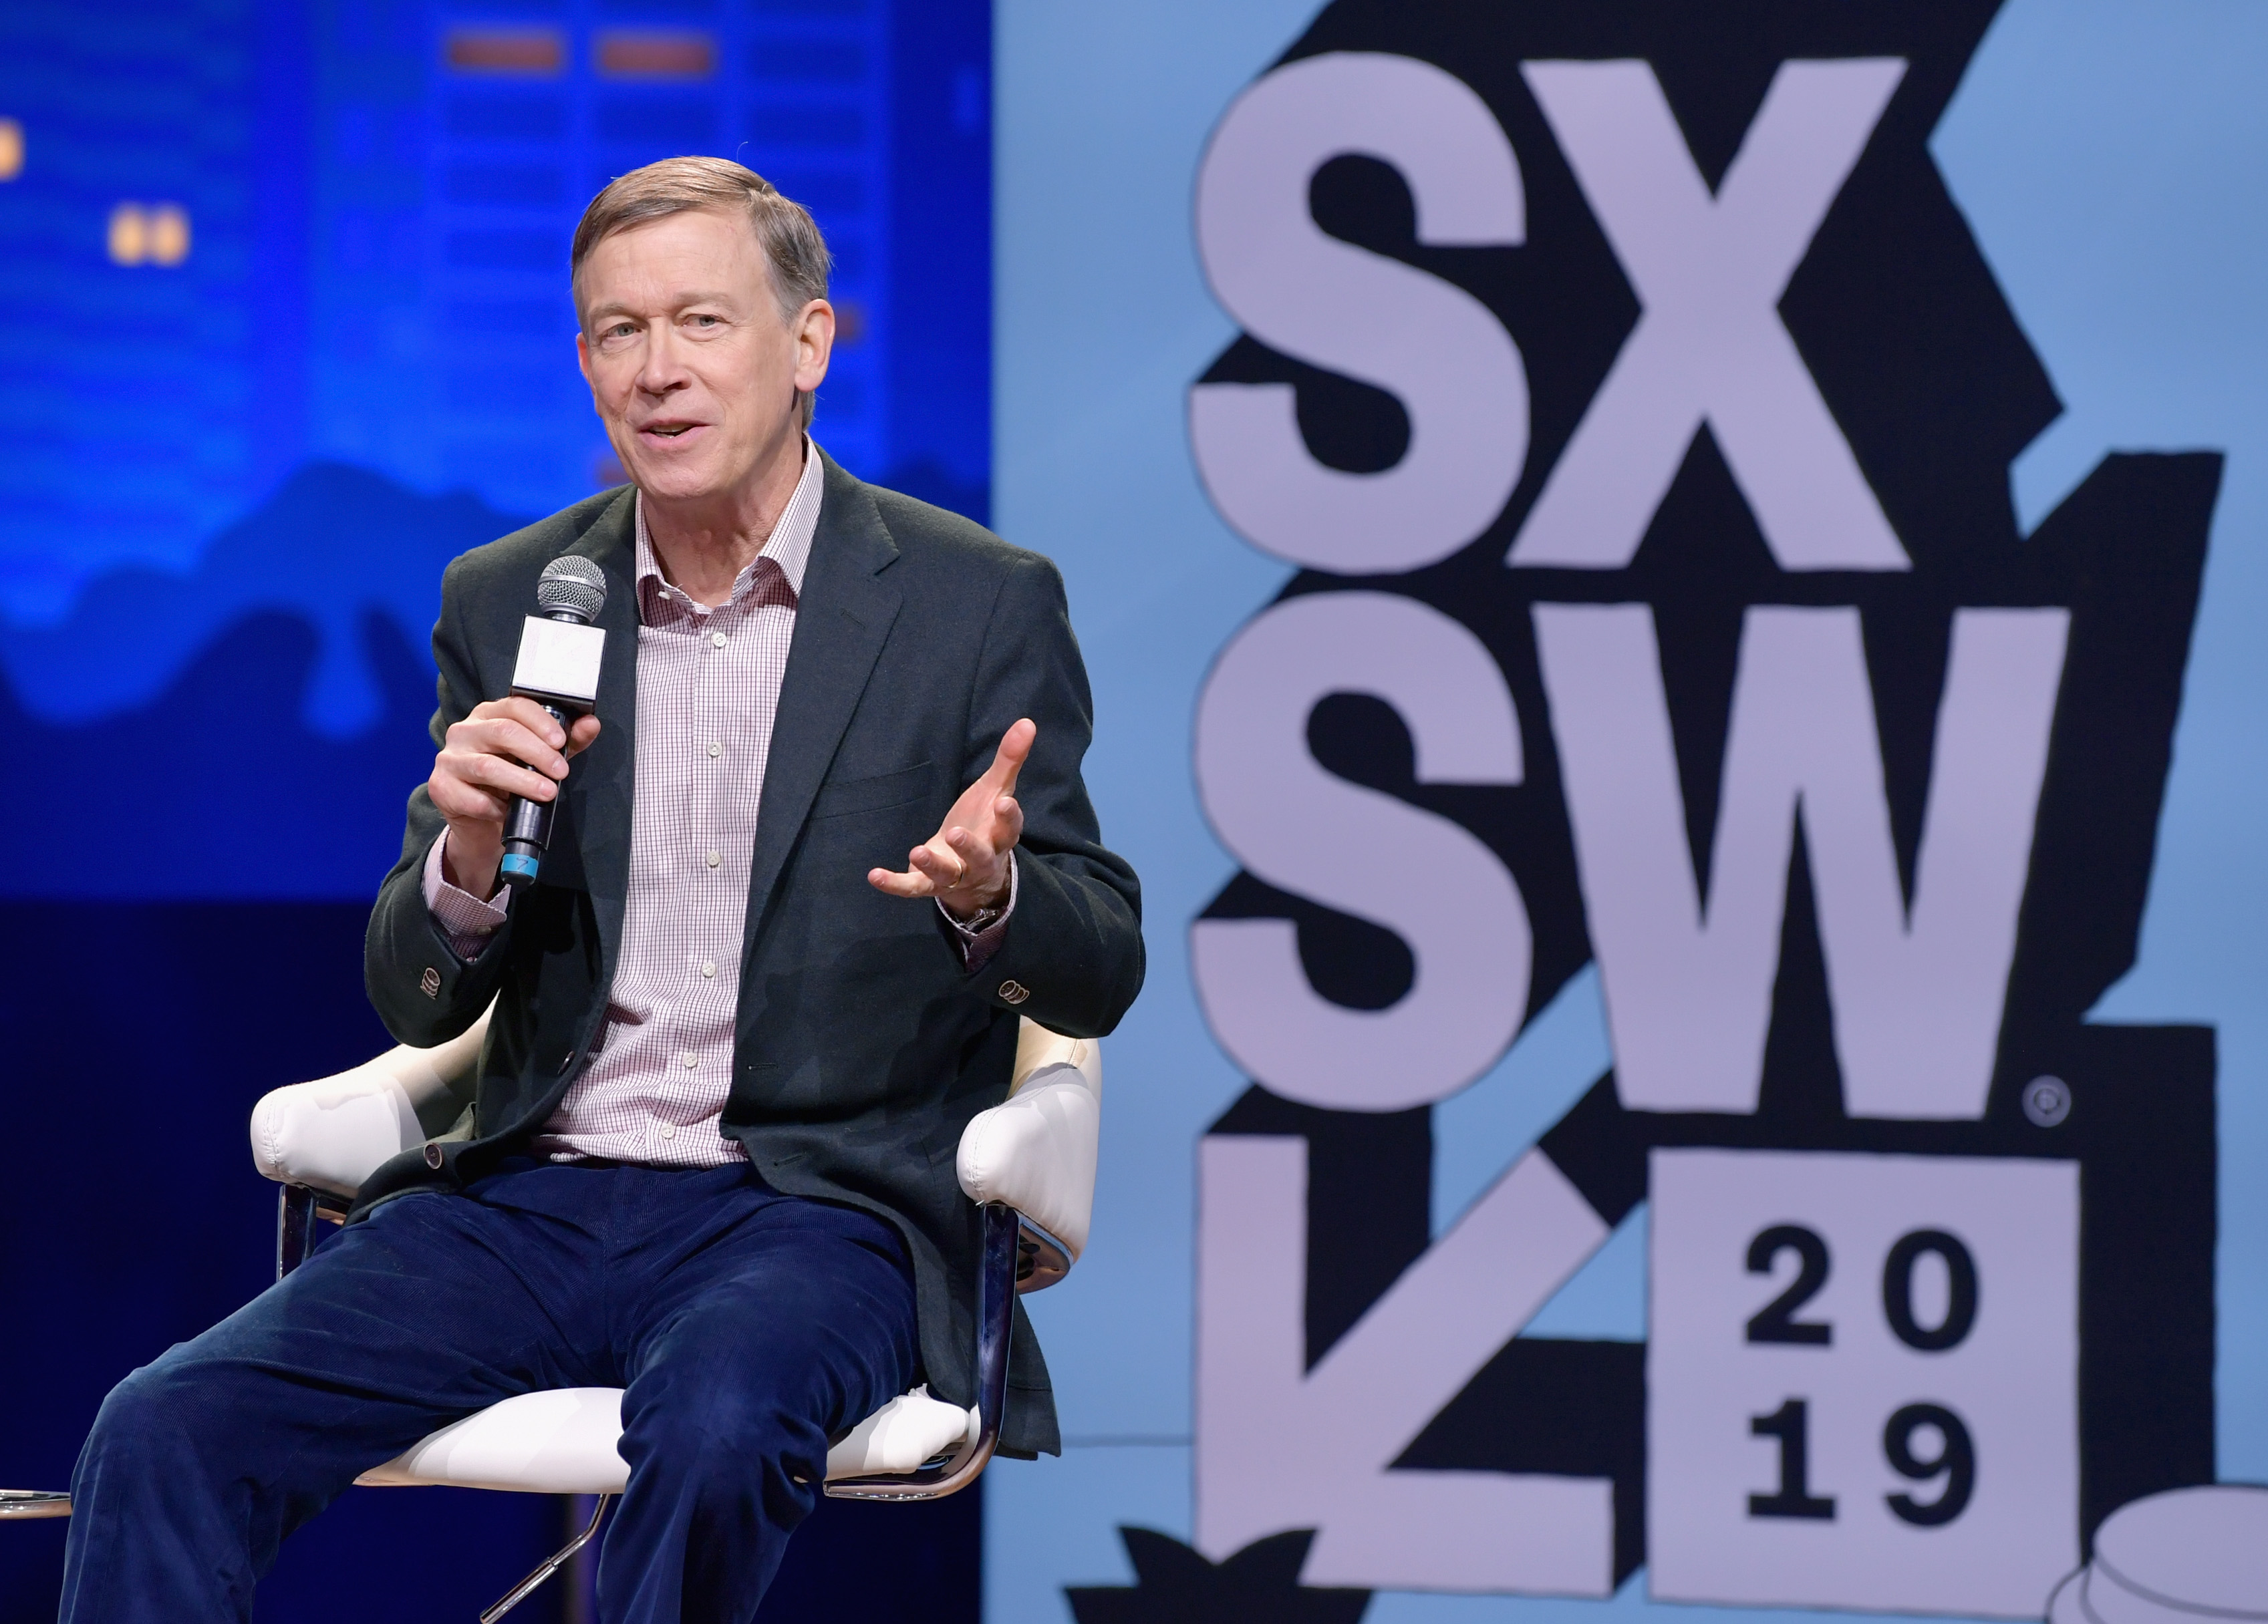 John Hickenlooper speaks onstage at Conversations About America's Future: Former Governor John Hickenlooper during the 2019 SXSW Conference and Festivals at Austin City Limits Live at the Moody Theater on March 10, 2019 in Austin, Texas. (Danny Matson—Getty Images)